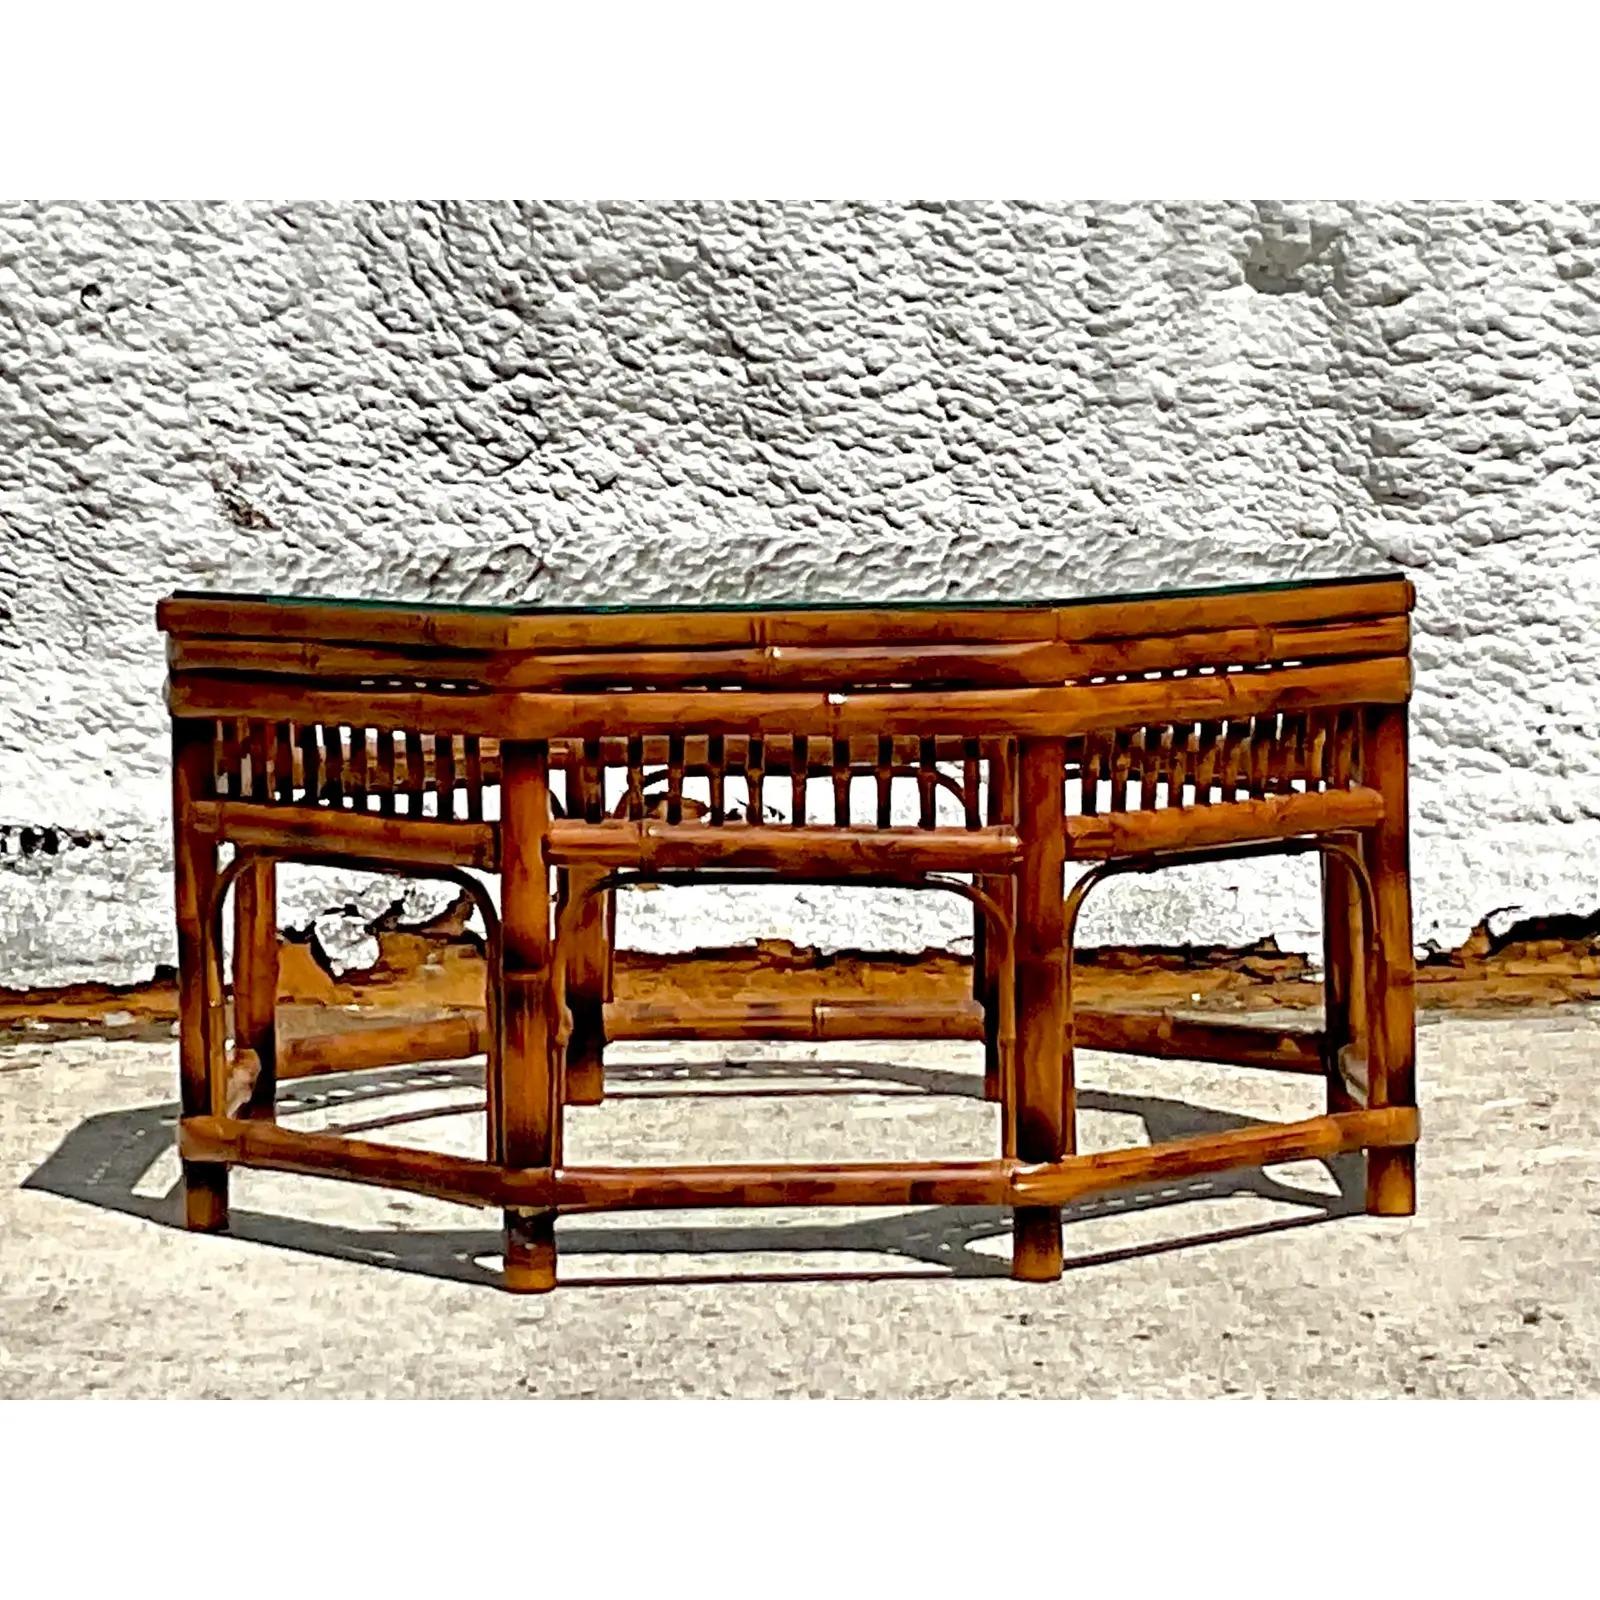 A fantastic vintage Coastal coffee table. A beautiful bamboo octagon shape with beautiful fretwork design. Glass top. Acquired from a Palm Beach estate.